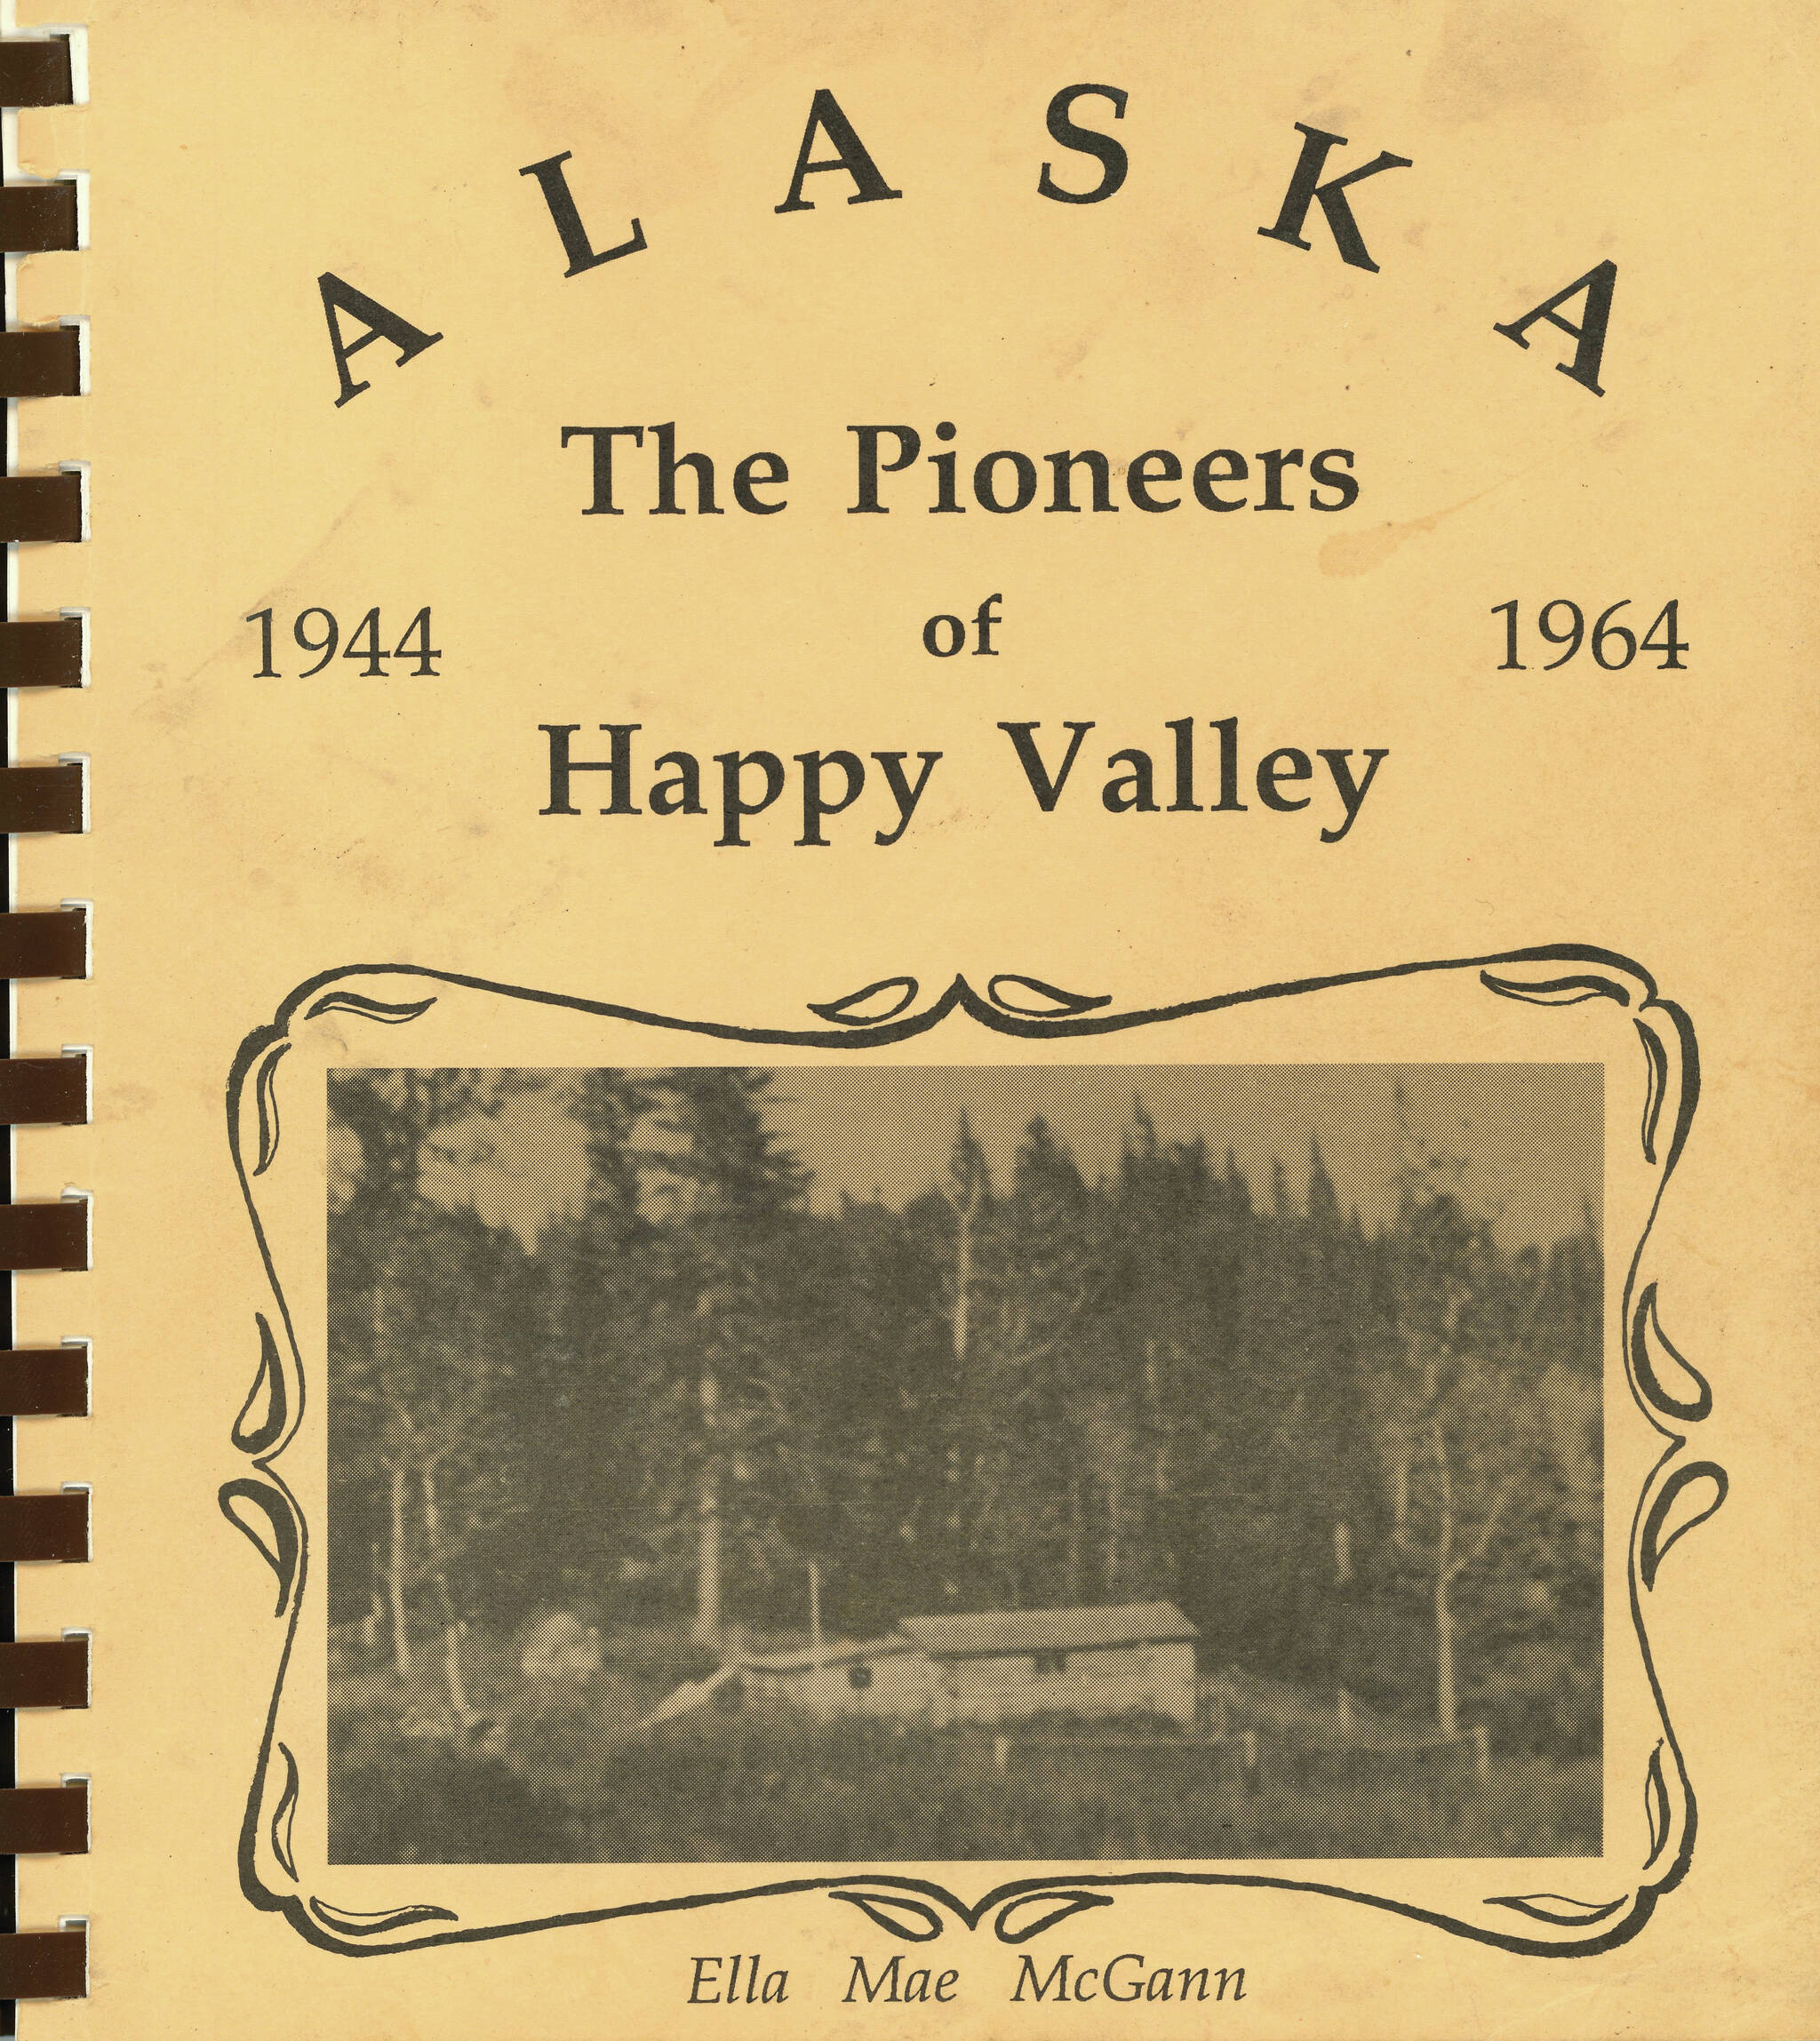 Cover image courtesy of Adrienne Walli Sweeney
The cover of Ella Mae McGann’s history book, “The Pioneers of Happy Valley, 1944-1964,” shows the original homesteading cabin of Homer and Nell Crosby.